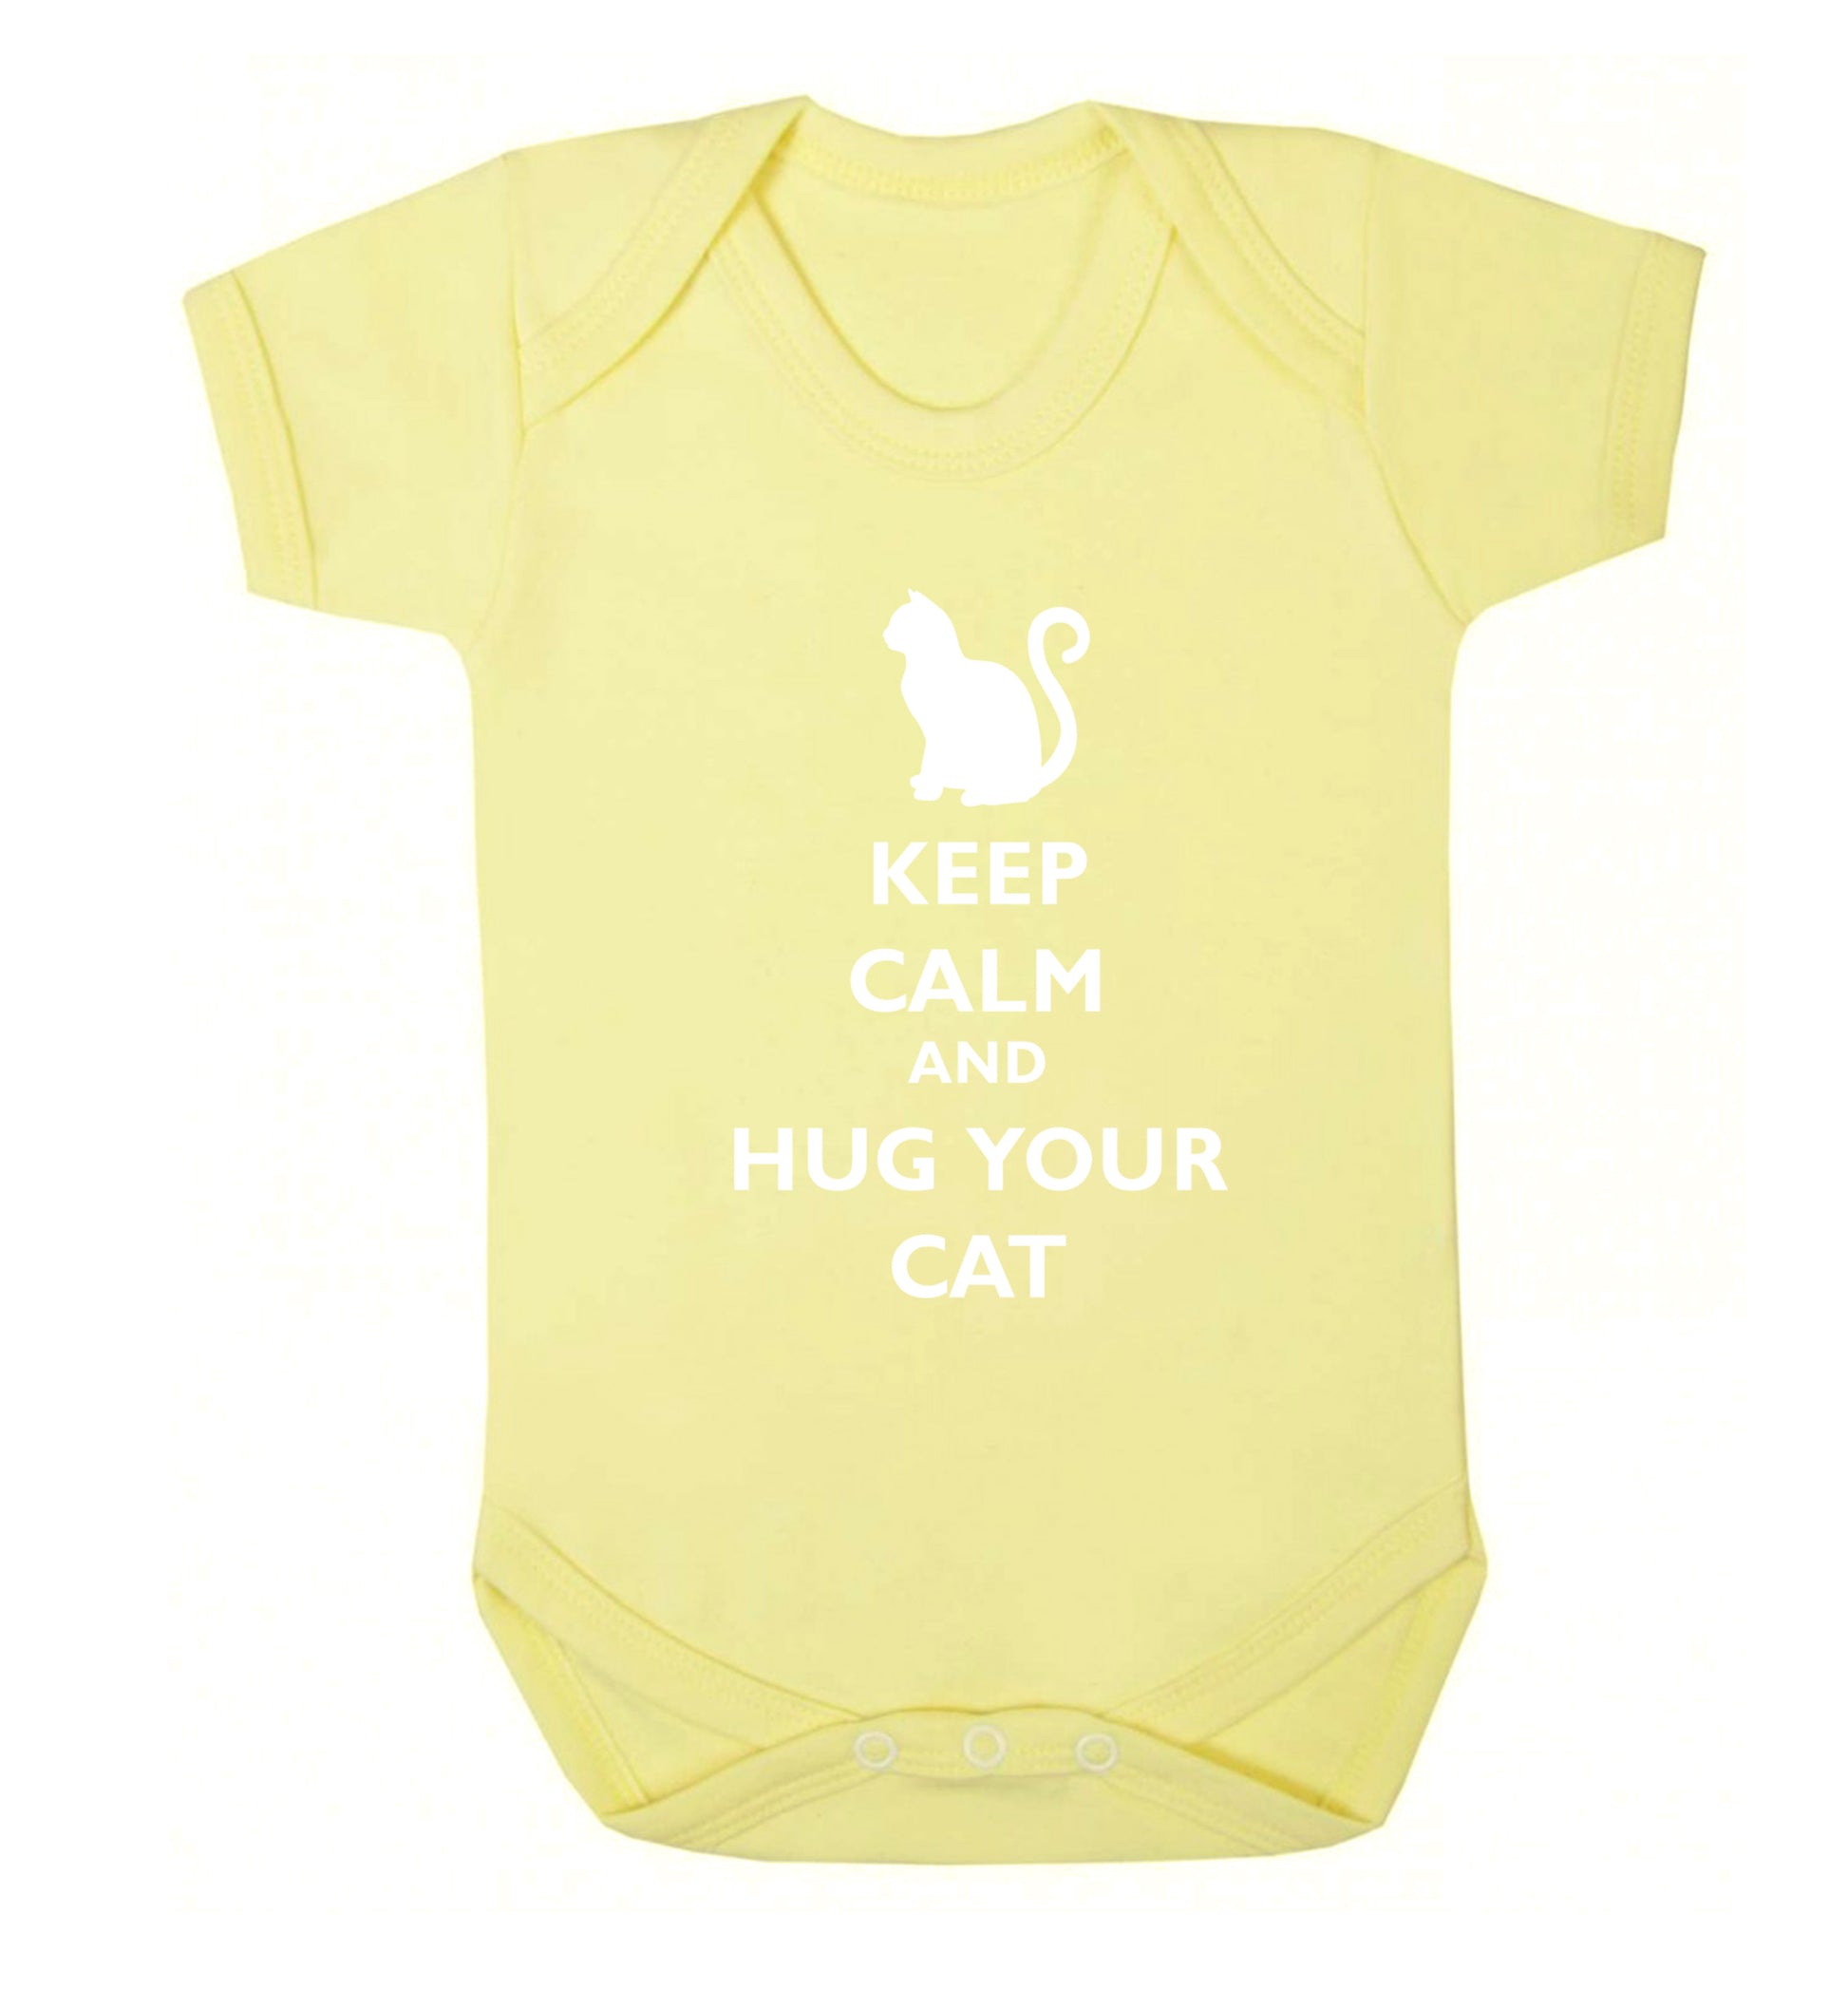 Keep calm and hug your cat Baby Vest pale yellow 18-24 months